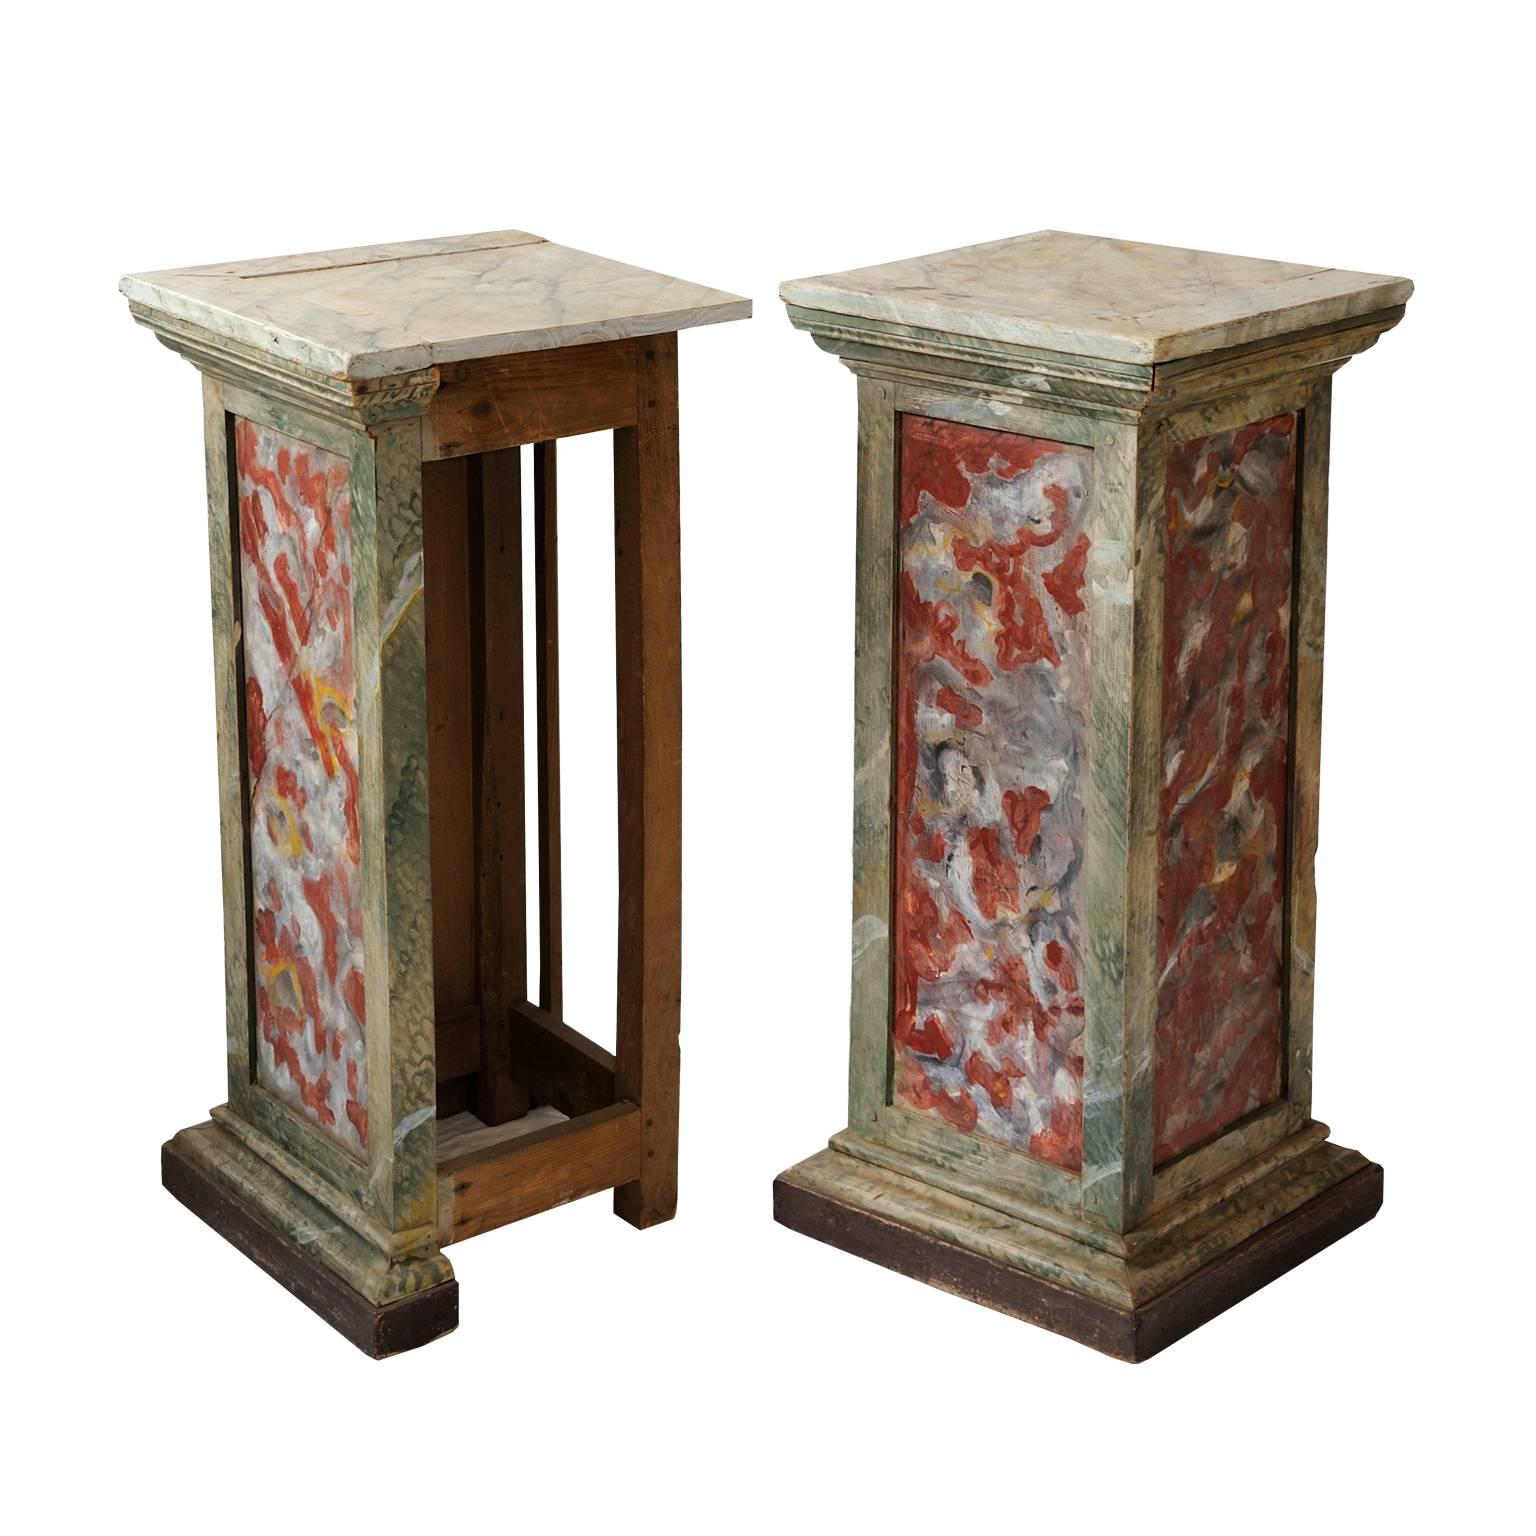 This is a wonderful pair of Italian Louis XVI faux painted marble corner pedestals or columns with open-framed backs, circa 1780.